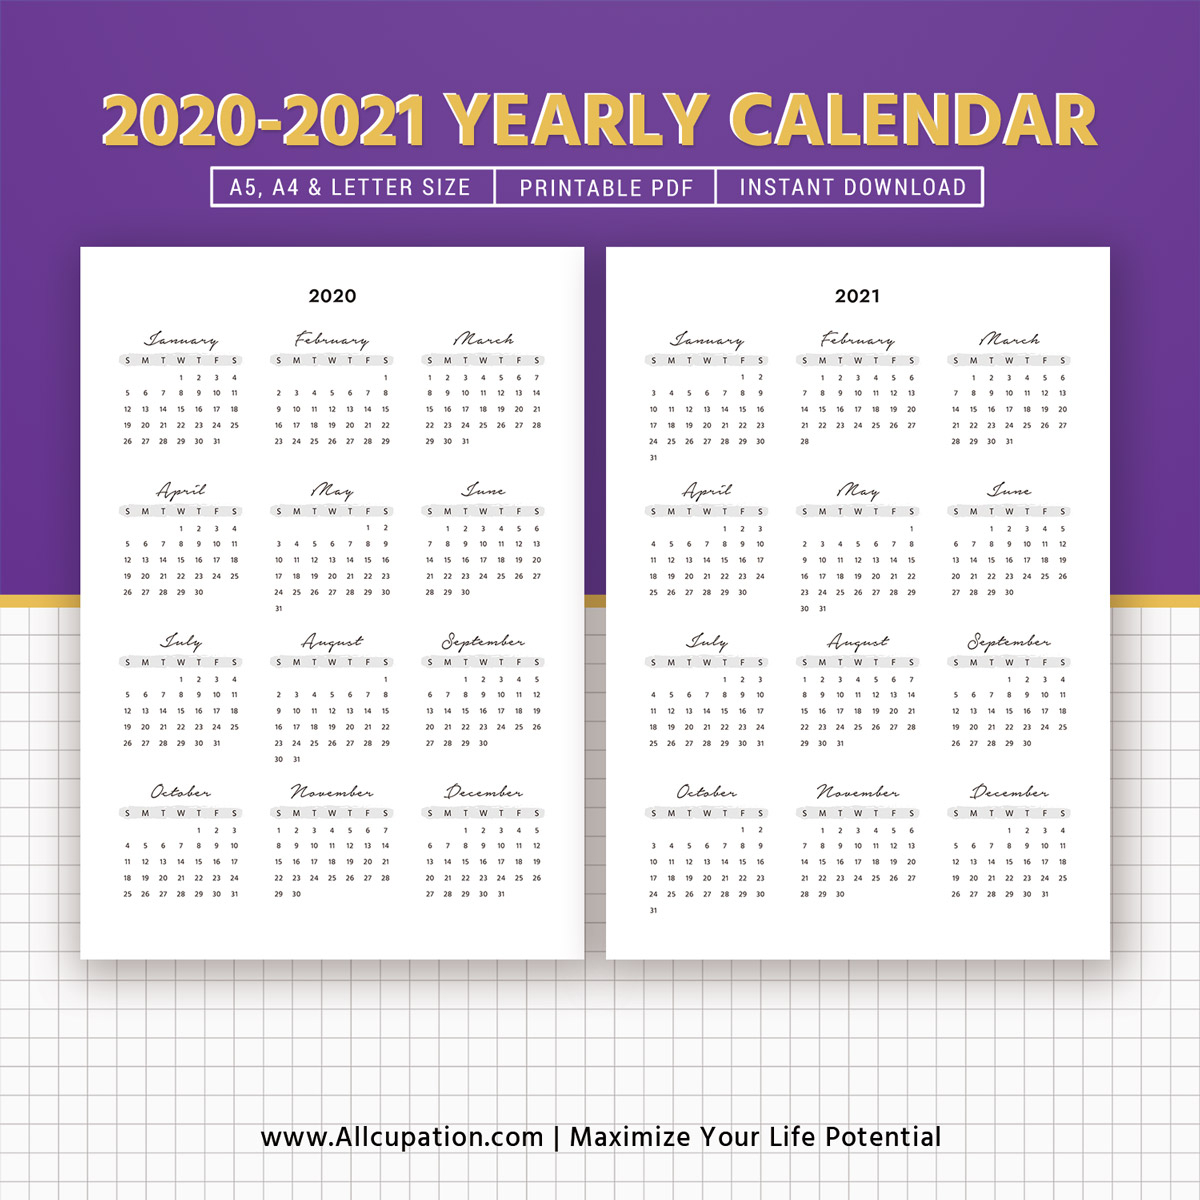 2020-2021 Yearly Calendar, Year At A Glance, Printable